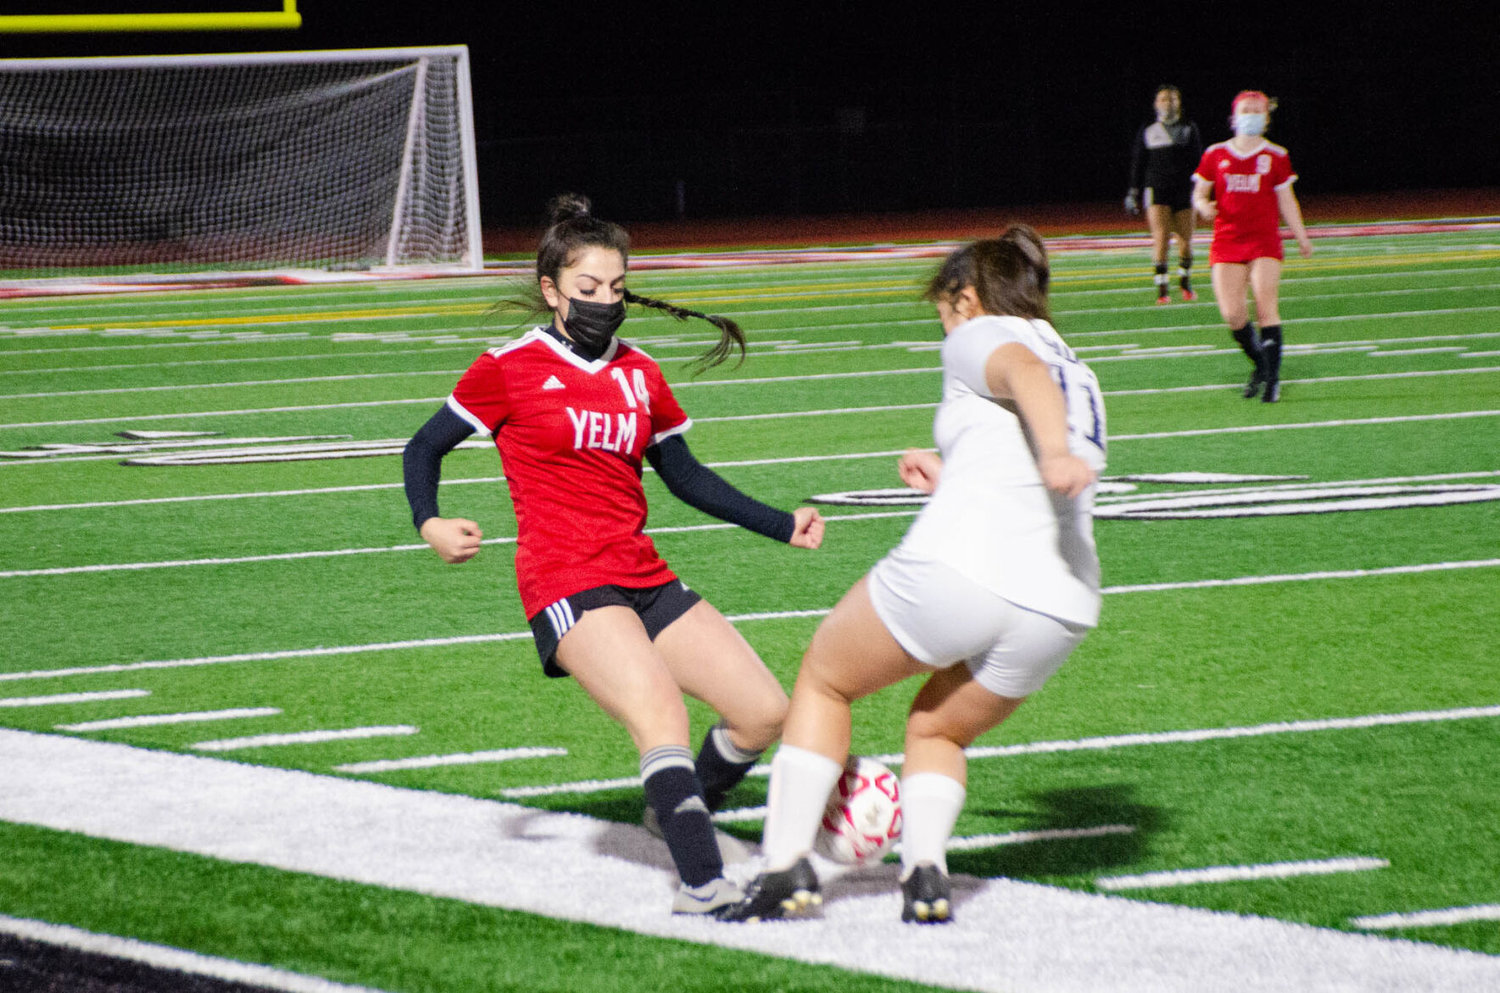 Junior fullback Socorro Scotto-Rodriguez, of Yelm, approaches River Ridge midfielder Meghan Kneable on the attack during a Tuesday night matchup. 